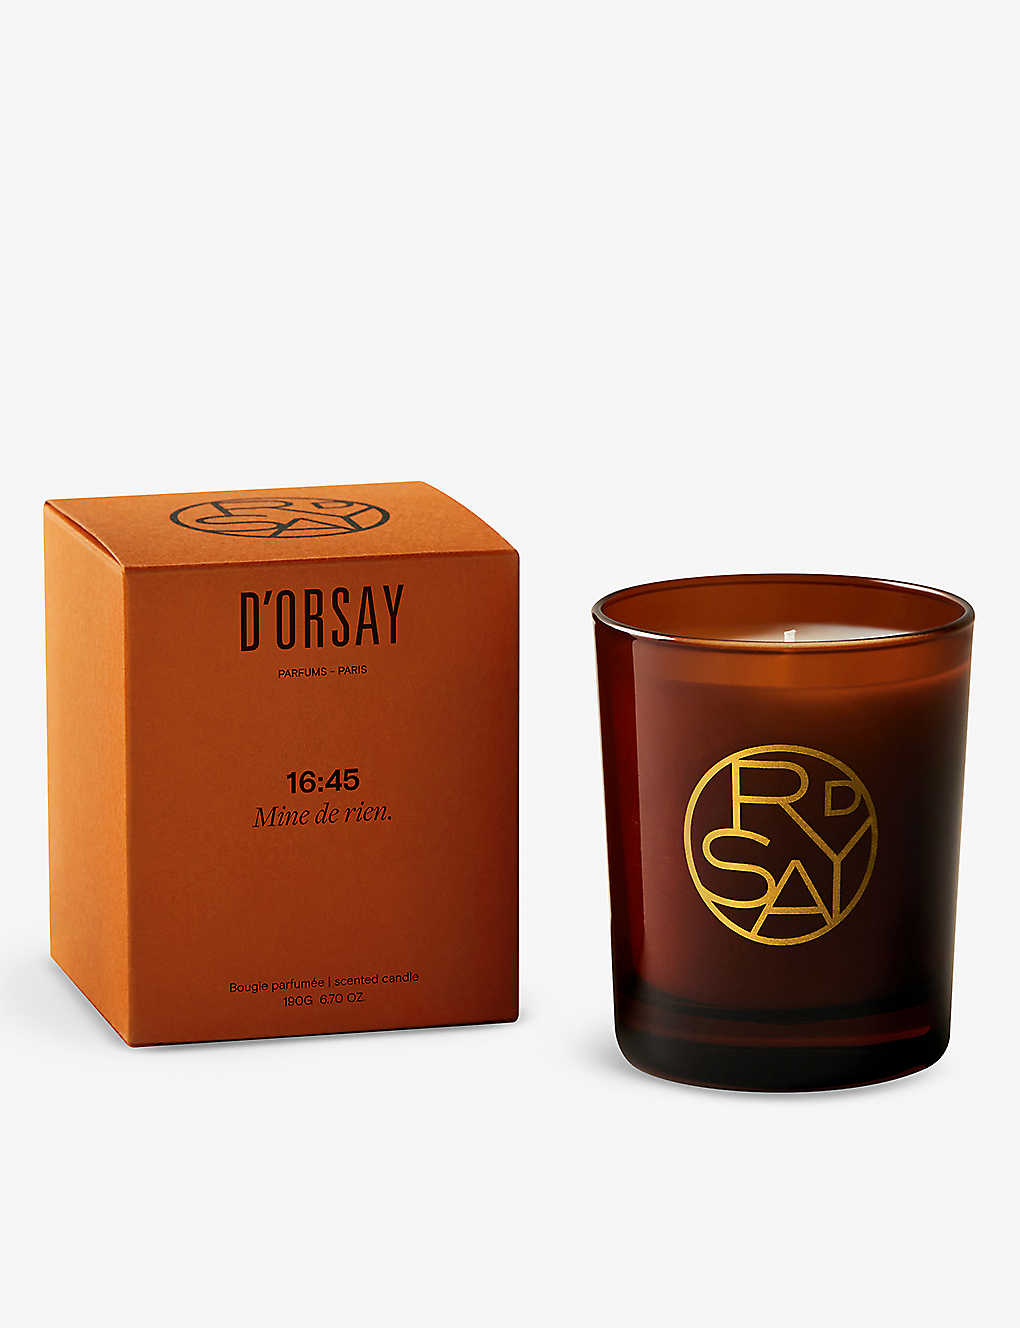 D'orsay 16:45 Scented Candle 250g